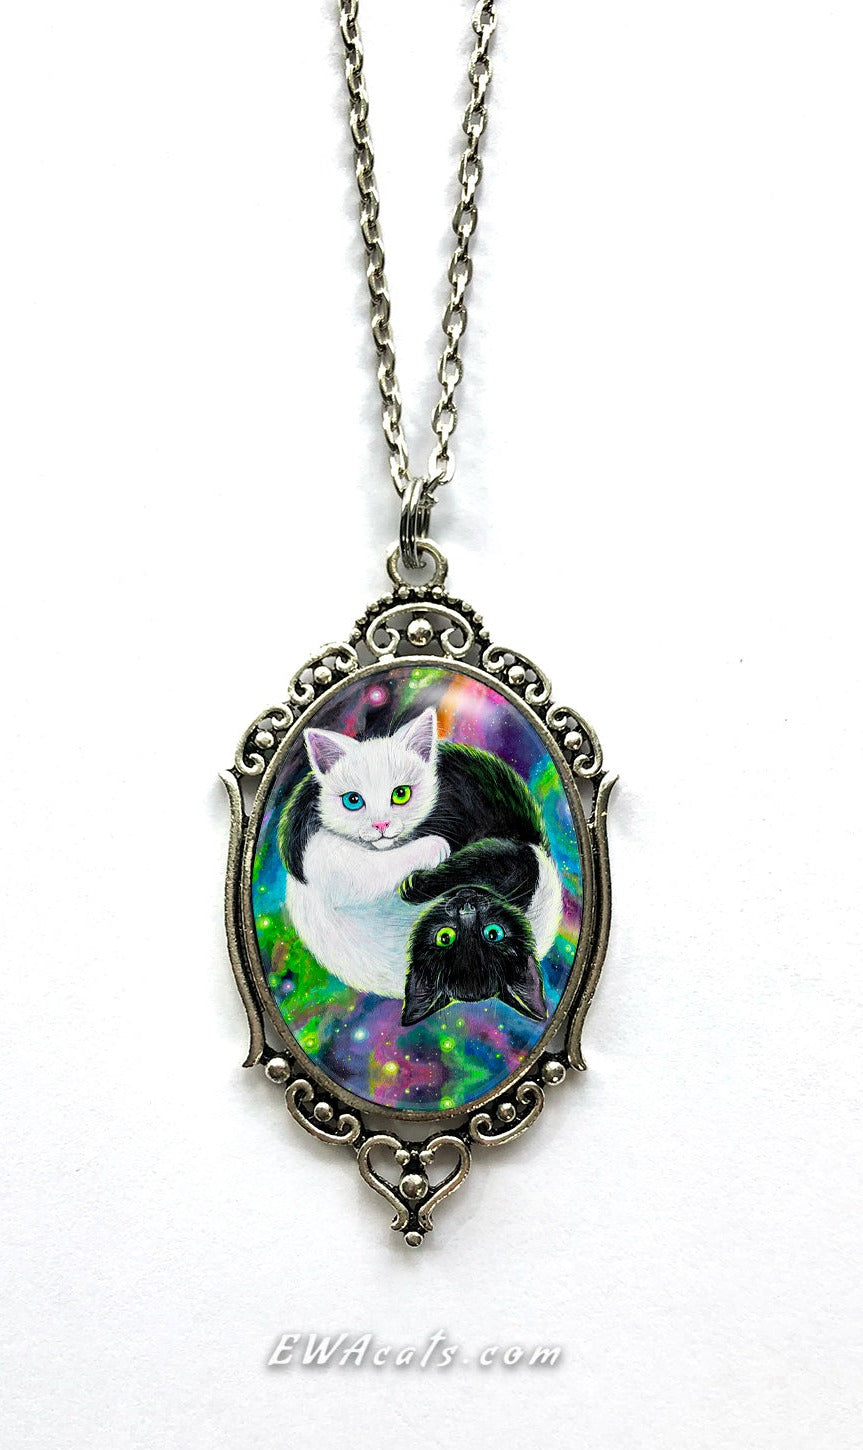 Necklace "Purrfect Harmony"